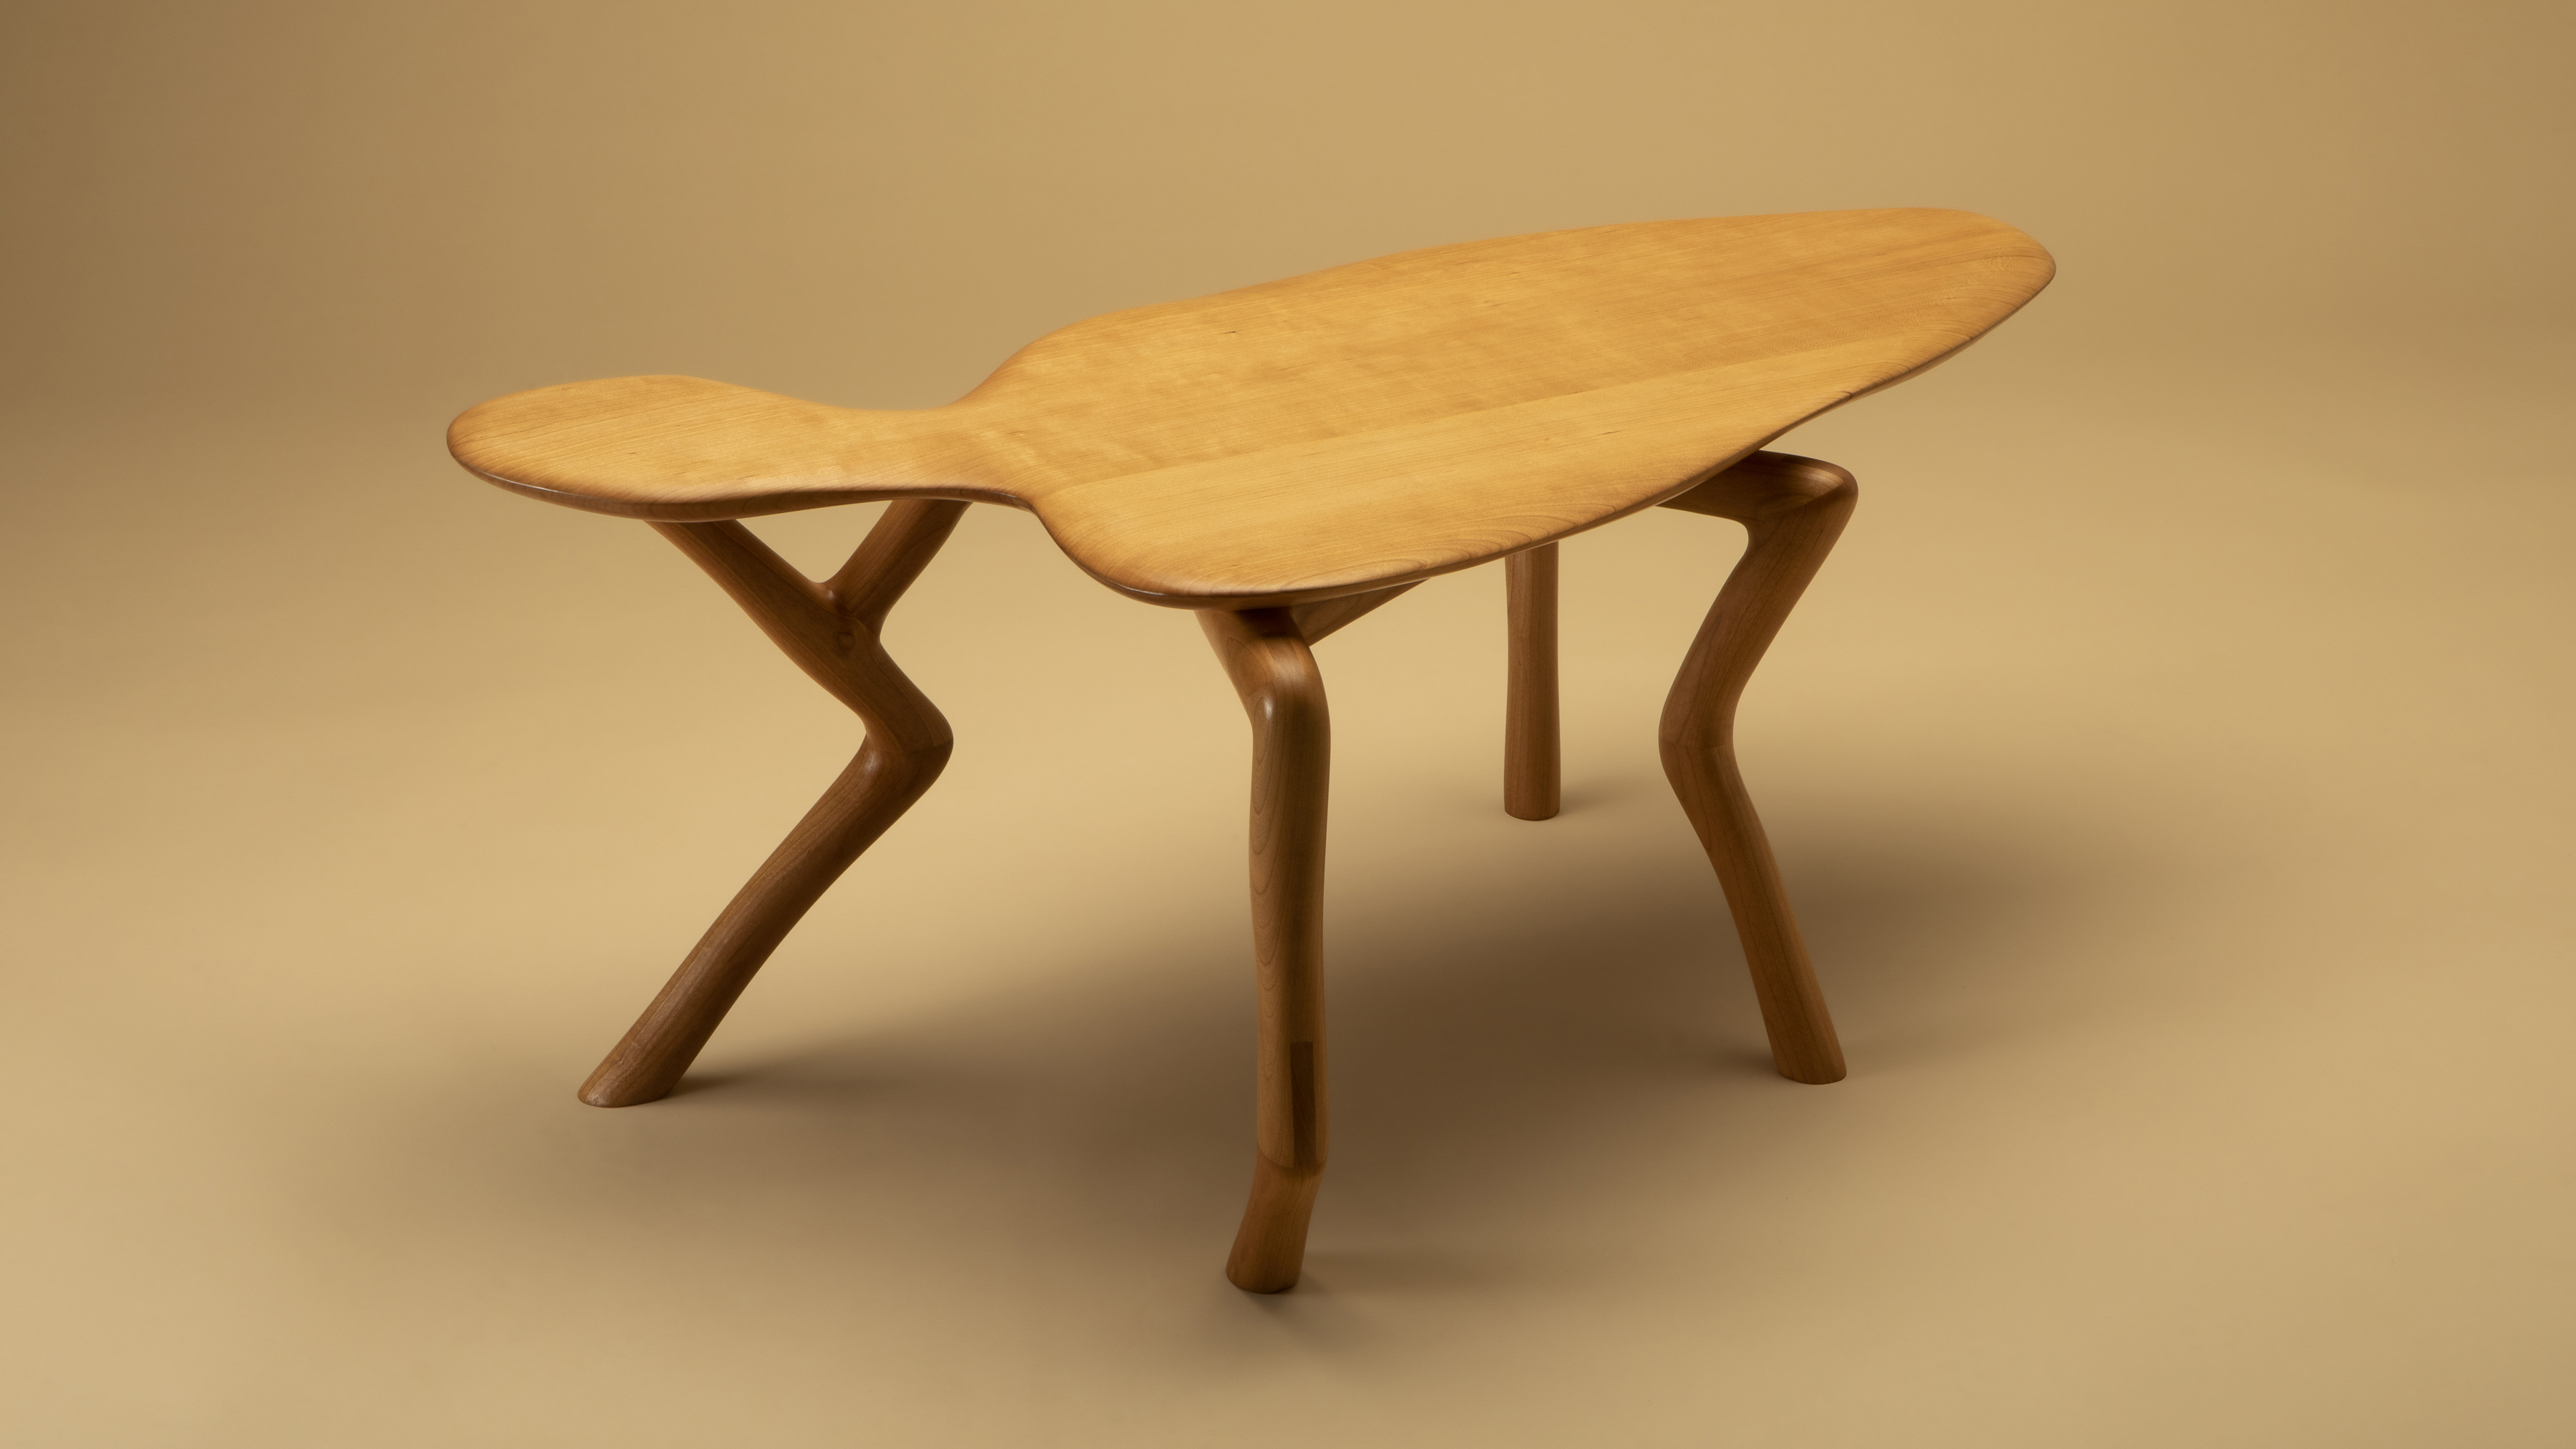 A table designed by Kelly Cleveland